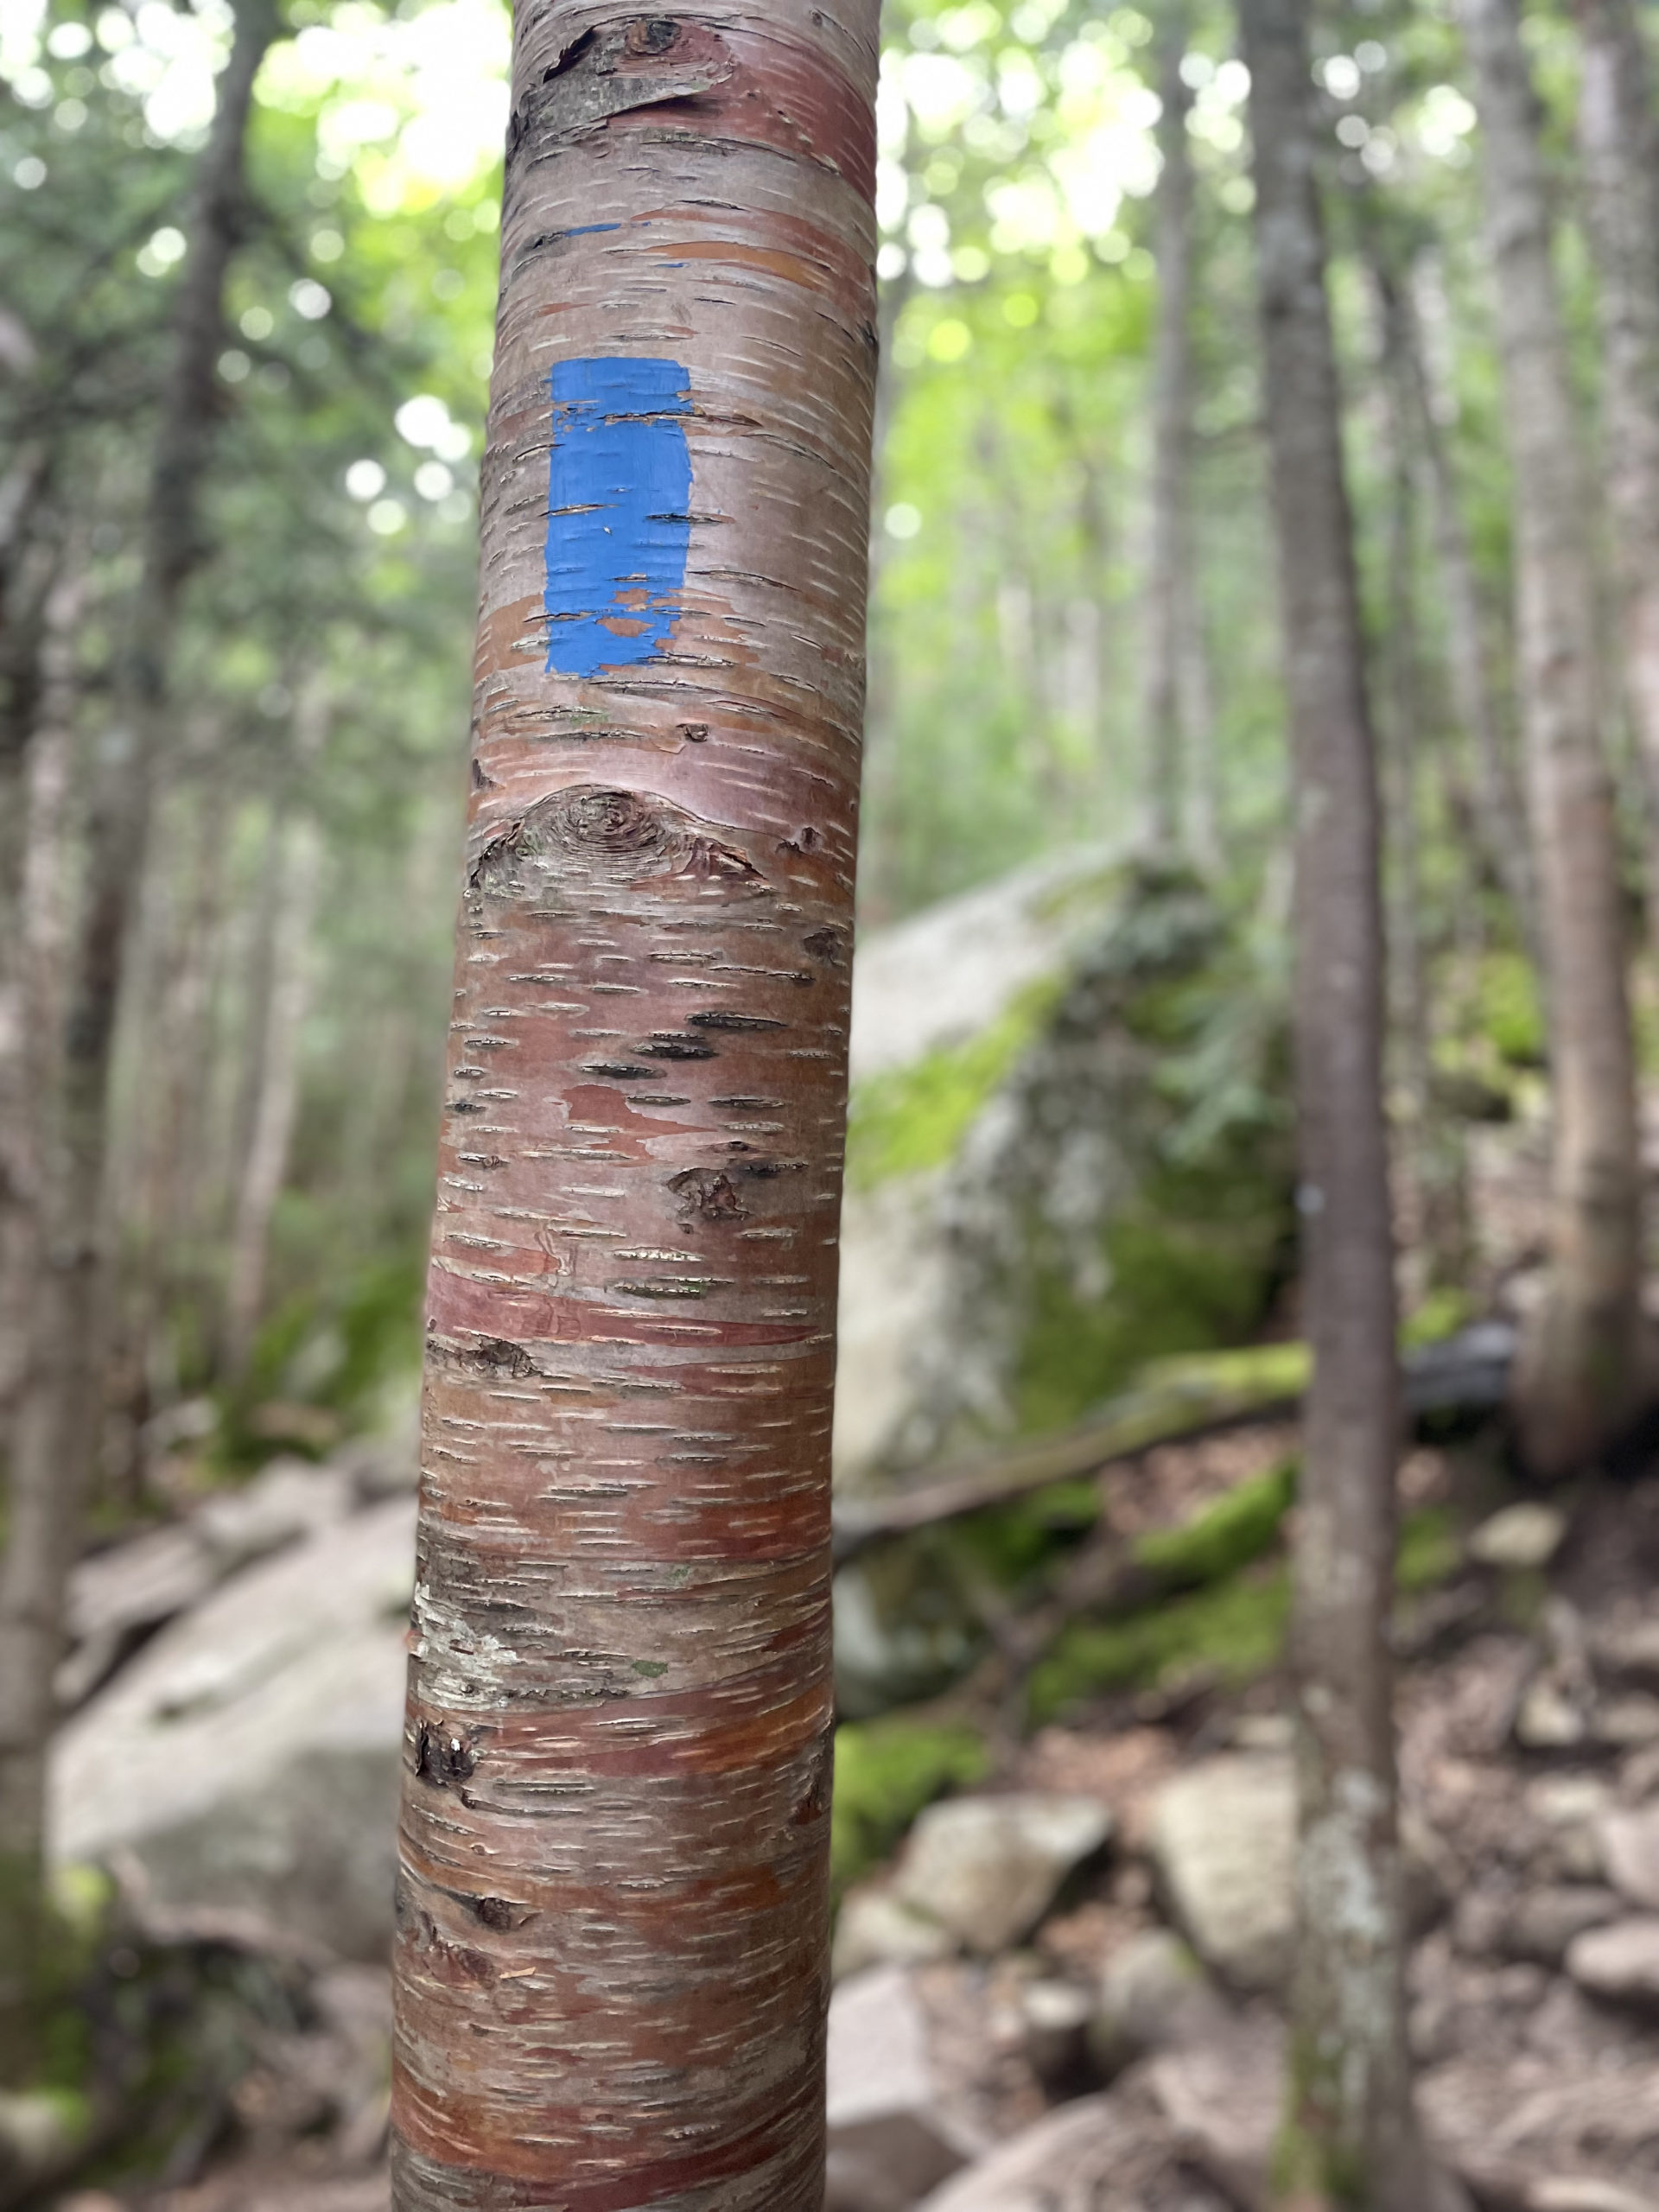 Blue blaze on a birch, seen while hike Mt. Lafayette and Mt. Lincoln in the White Mountain National Forest